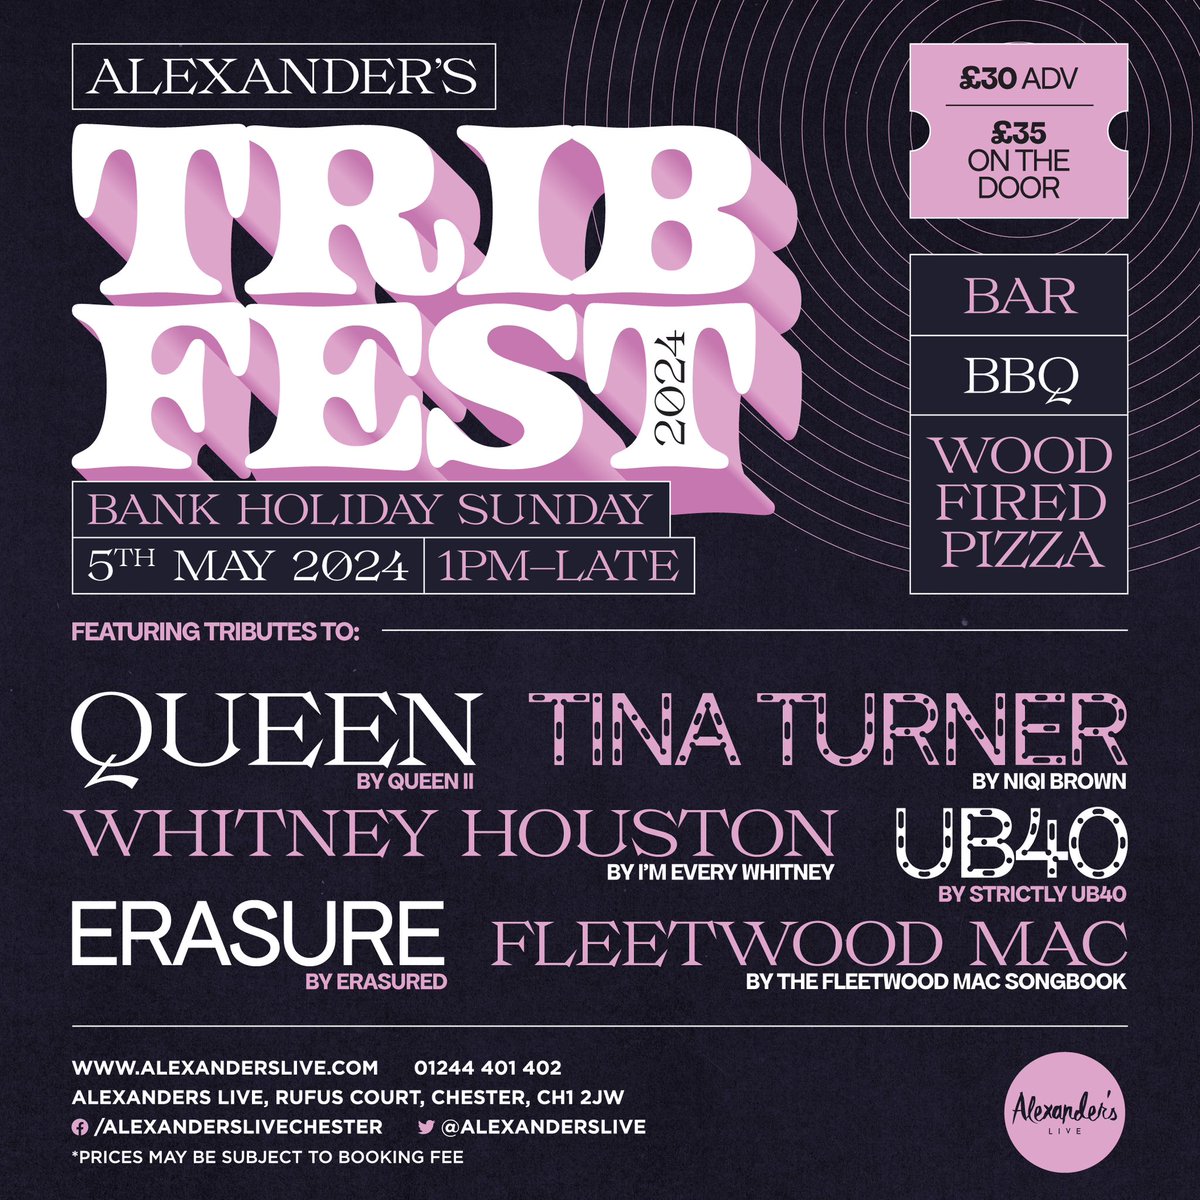 Have you got your 🎟️ tickets 🎟️ for this bank holiday Sunday yet? Tributes to #queen #tinaturner #whitenyhouston #ub40 #erasure #fleetwoodmac alexanderslive.seetickets.com/event/alexande… @ShitChester @SkintChester @welovegoodtimes @chestertweetsuk @chesterdotcom @Dee1063